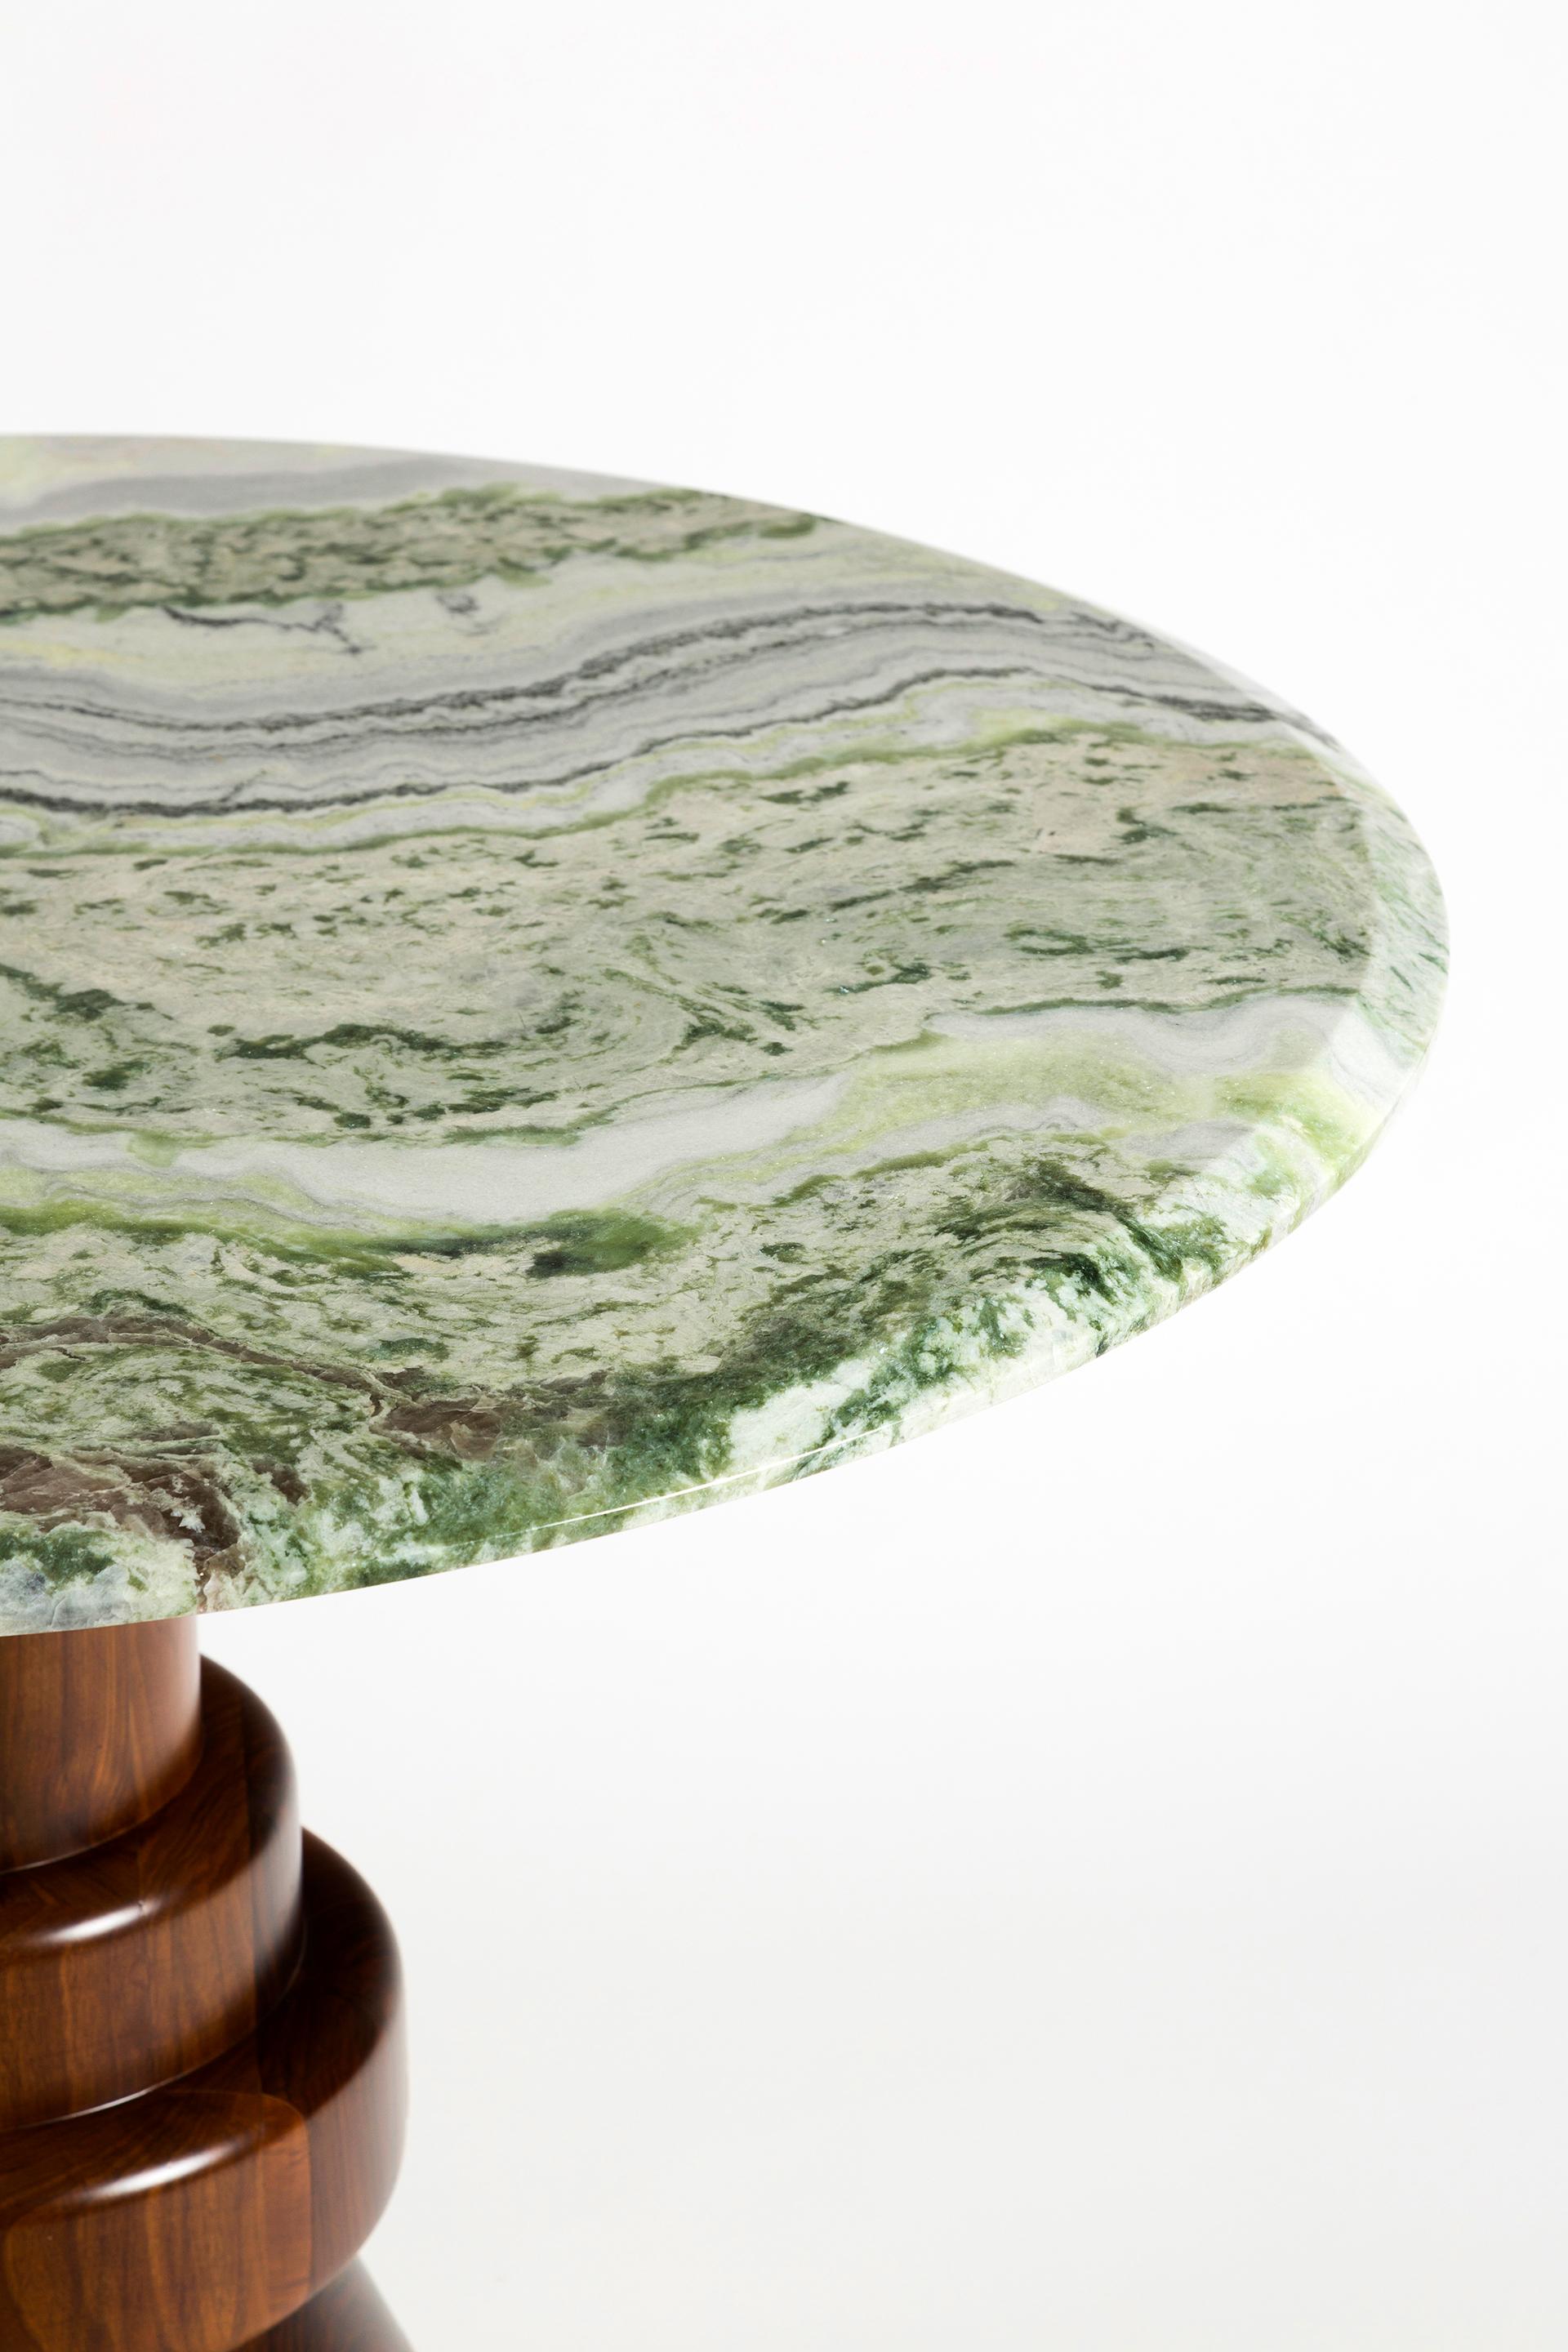 Arts and Crafts 21st Century Green Marble Round Dining Table with Sculptural Wooden Base For Sale